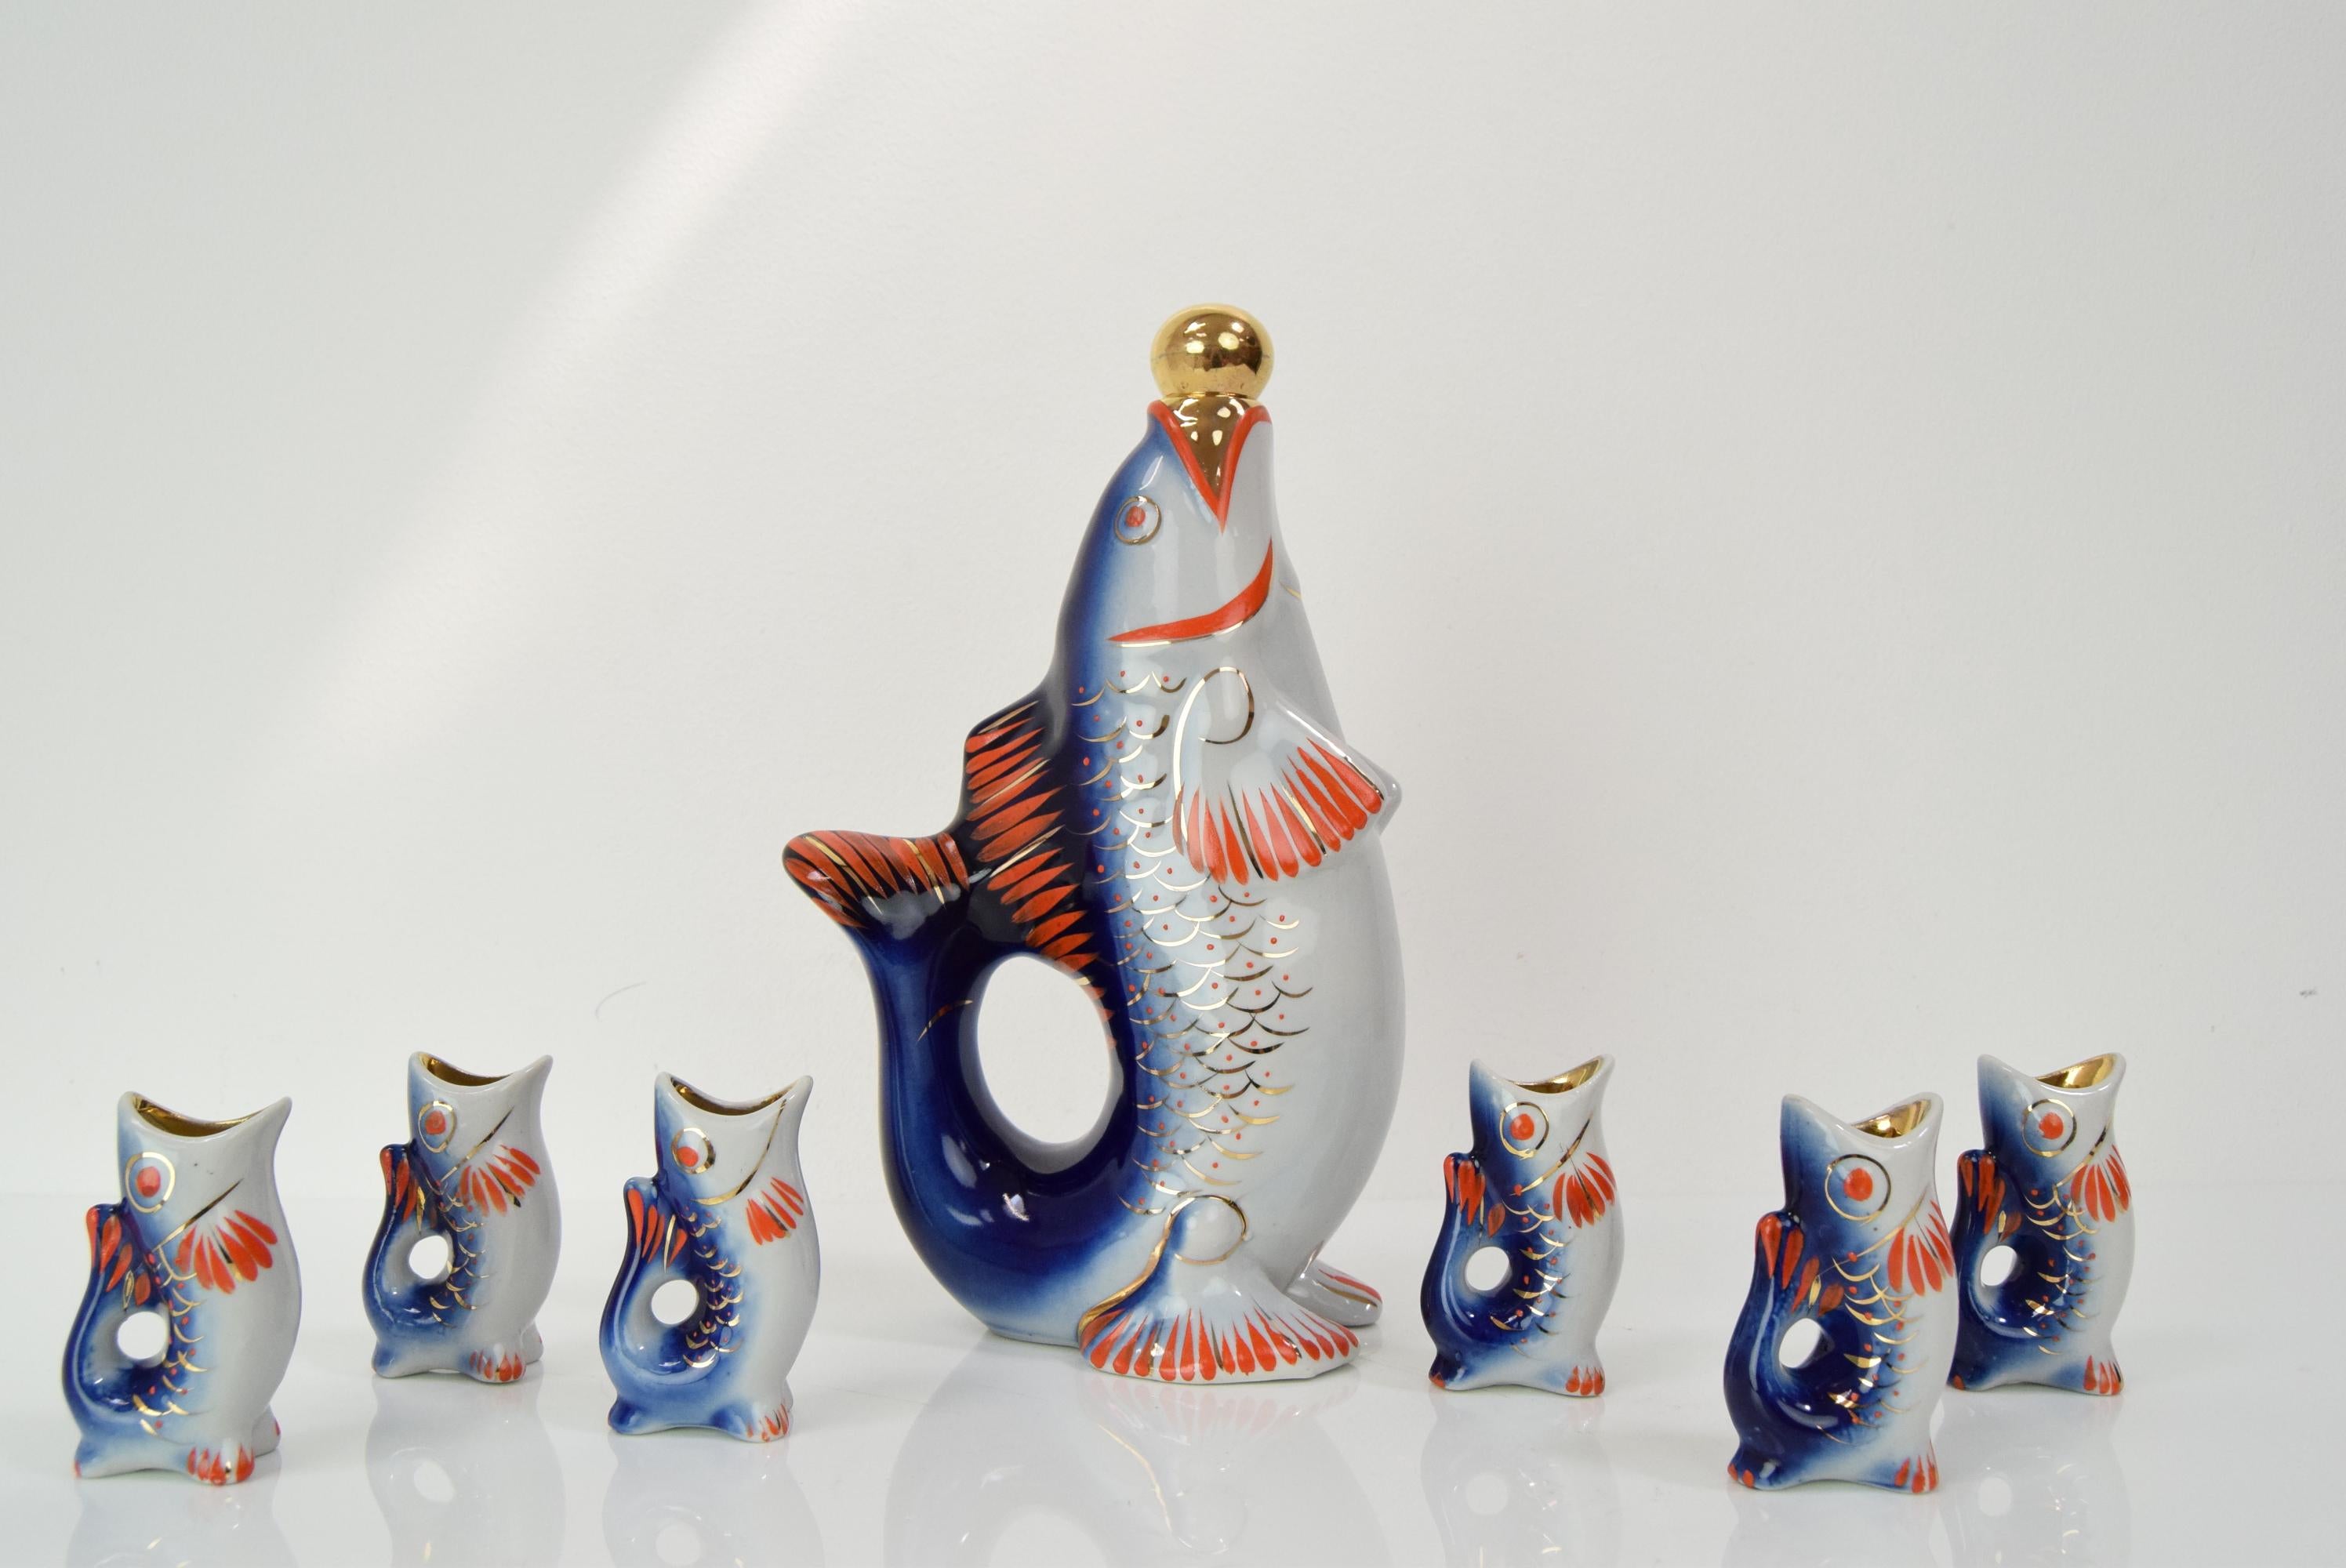 Made in Russia
Made of Porcelain
shots glass:Height 8cm
 :Depth 5cm
 Width 3cm
Re-polished
Good Original condition.